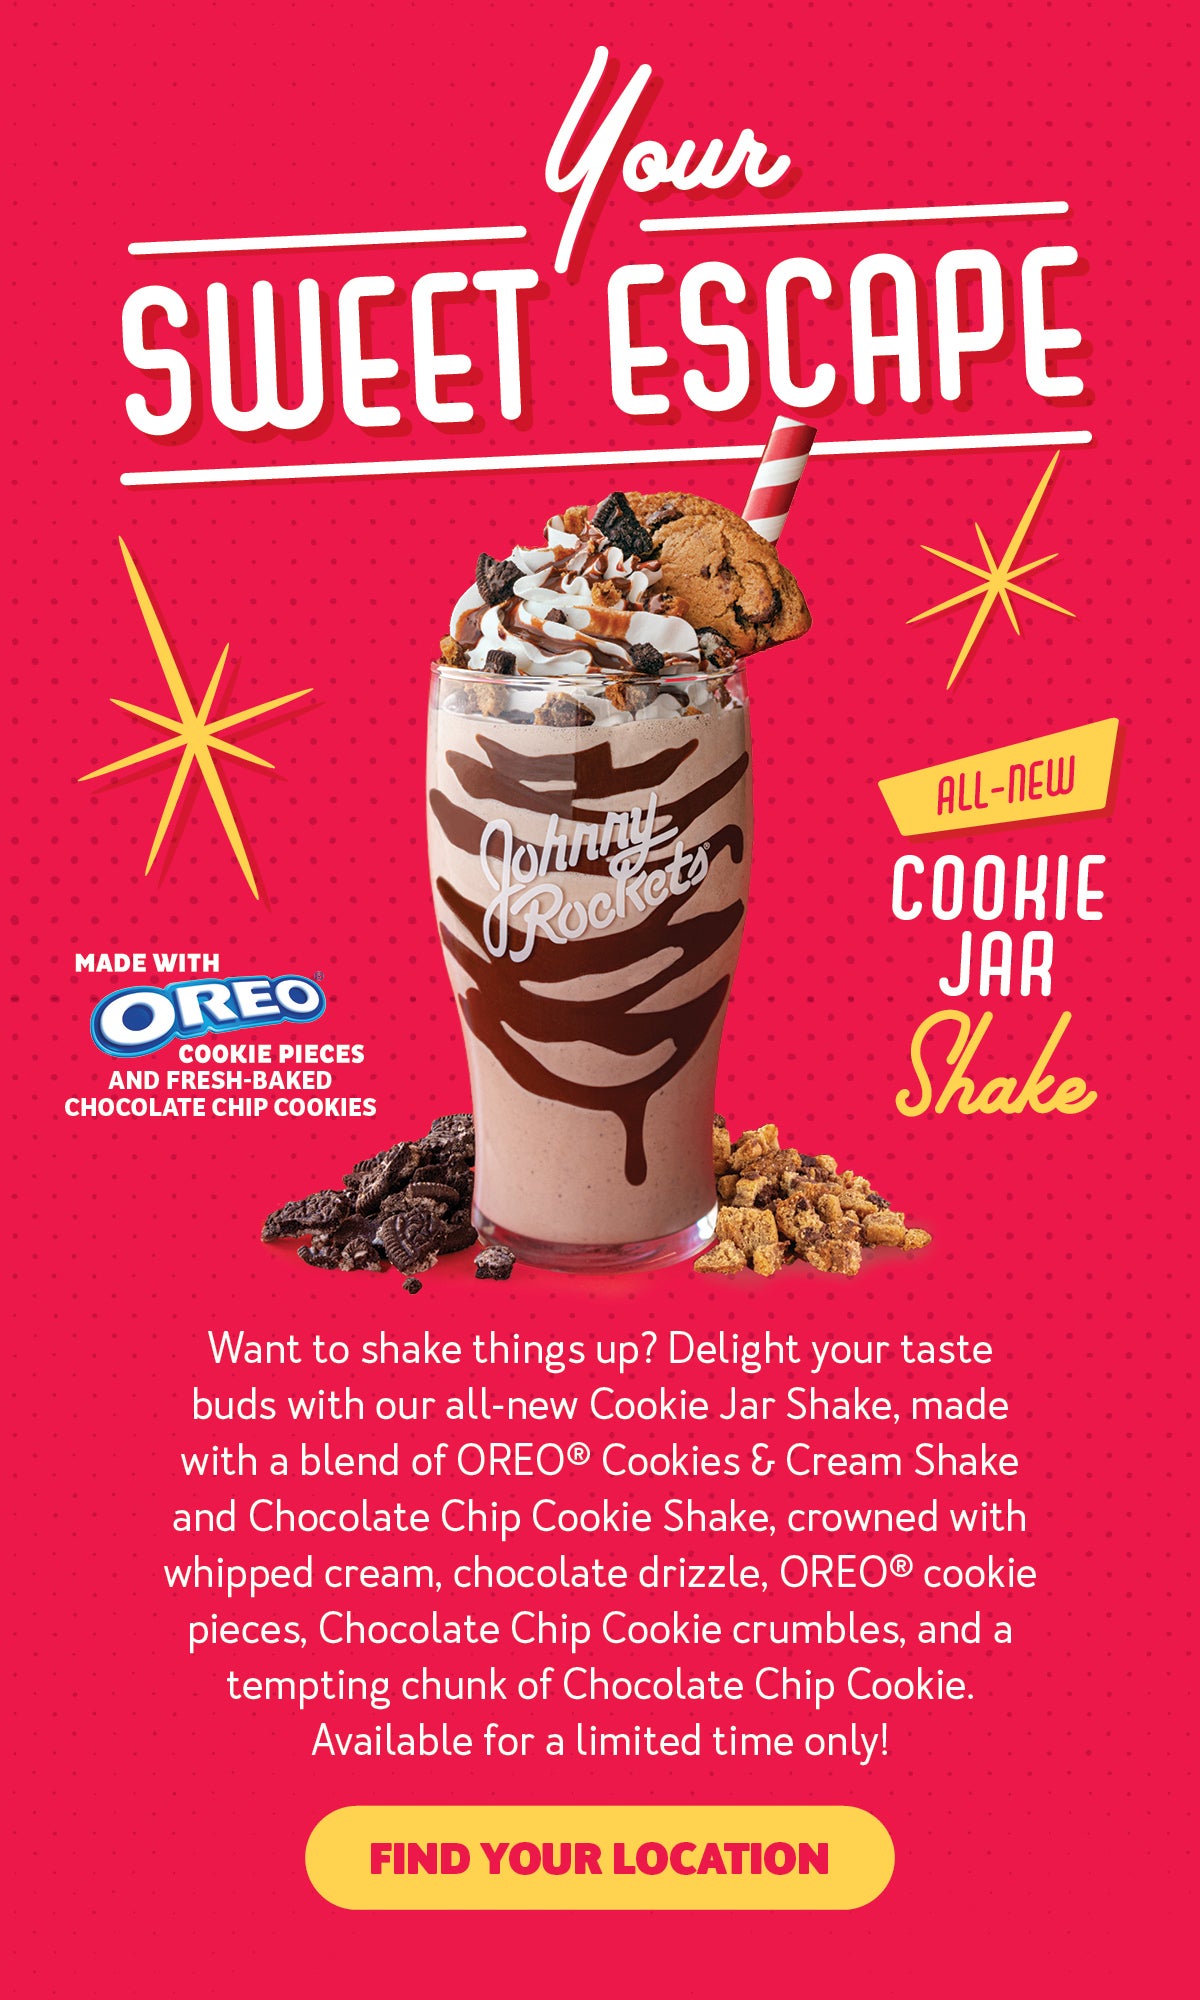 Your Sweet Escape. All-New Cookie Jar Shake. Made with OREO(R) cookie pieces and fresh baked chocolate chip cookies. Want to shake things up? Delight your taste buds with our all-new Cookie Jar Shake, made with a blend of OREO(R) Cookies and Cream Shake and Chocolate Chip Cookie Shake, crowned with whipped cream, chocolate drizzle, OREO(R) Cookie pieces, Chocolate Chip Cookie crumbles, and a tempting chunk of Chocolate Chip Cookie. Available for a limited time only! Find your location.